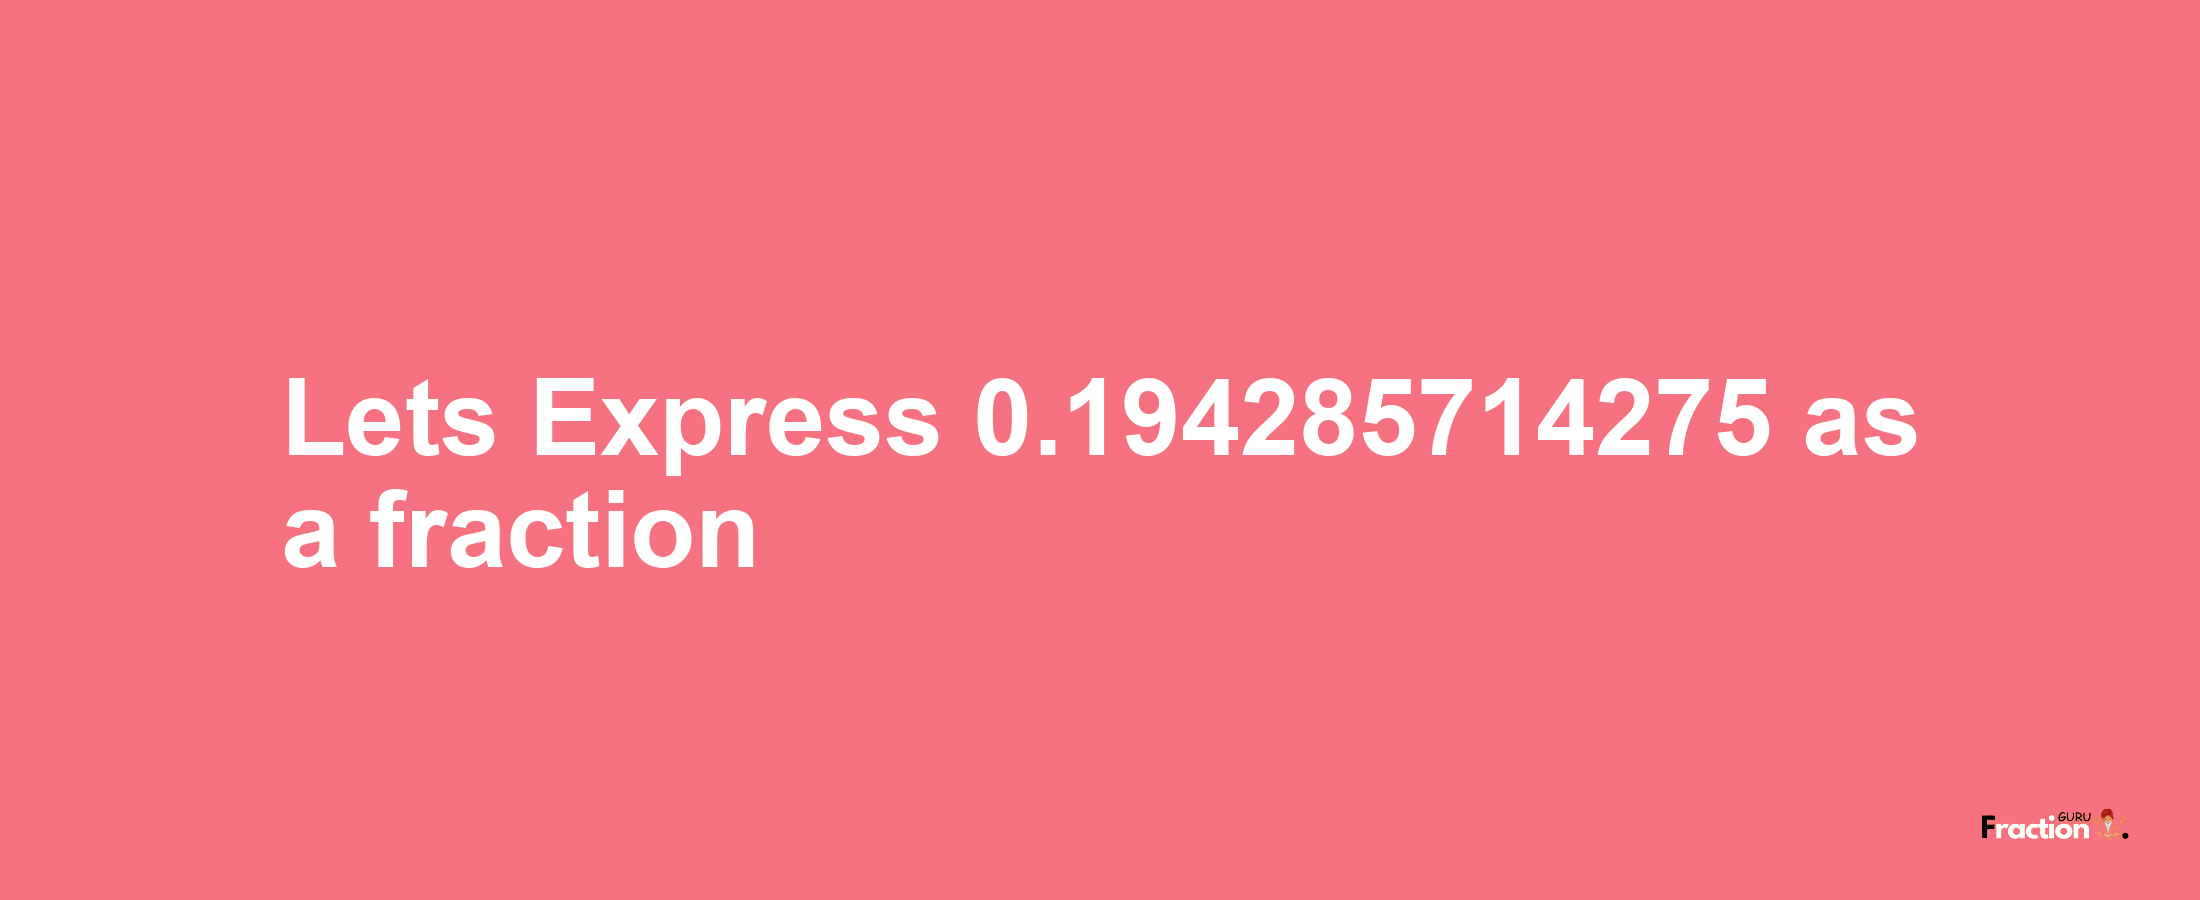 Lets Express 0.194285714275 as afraction